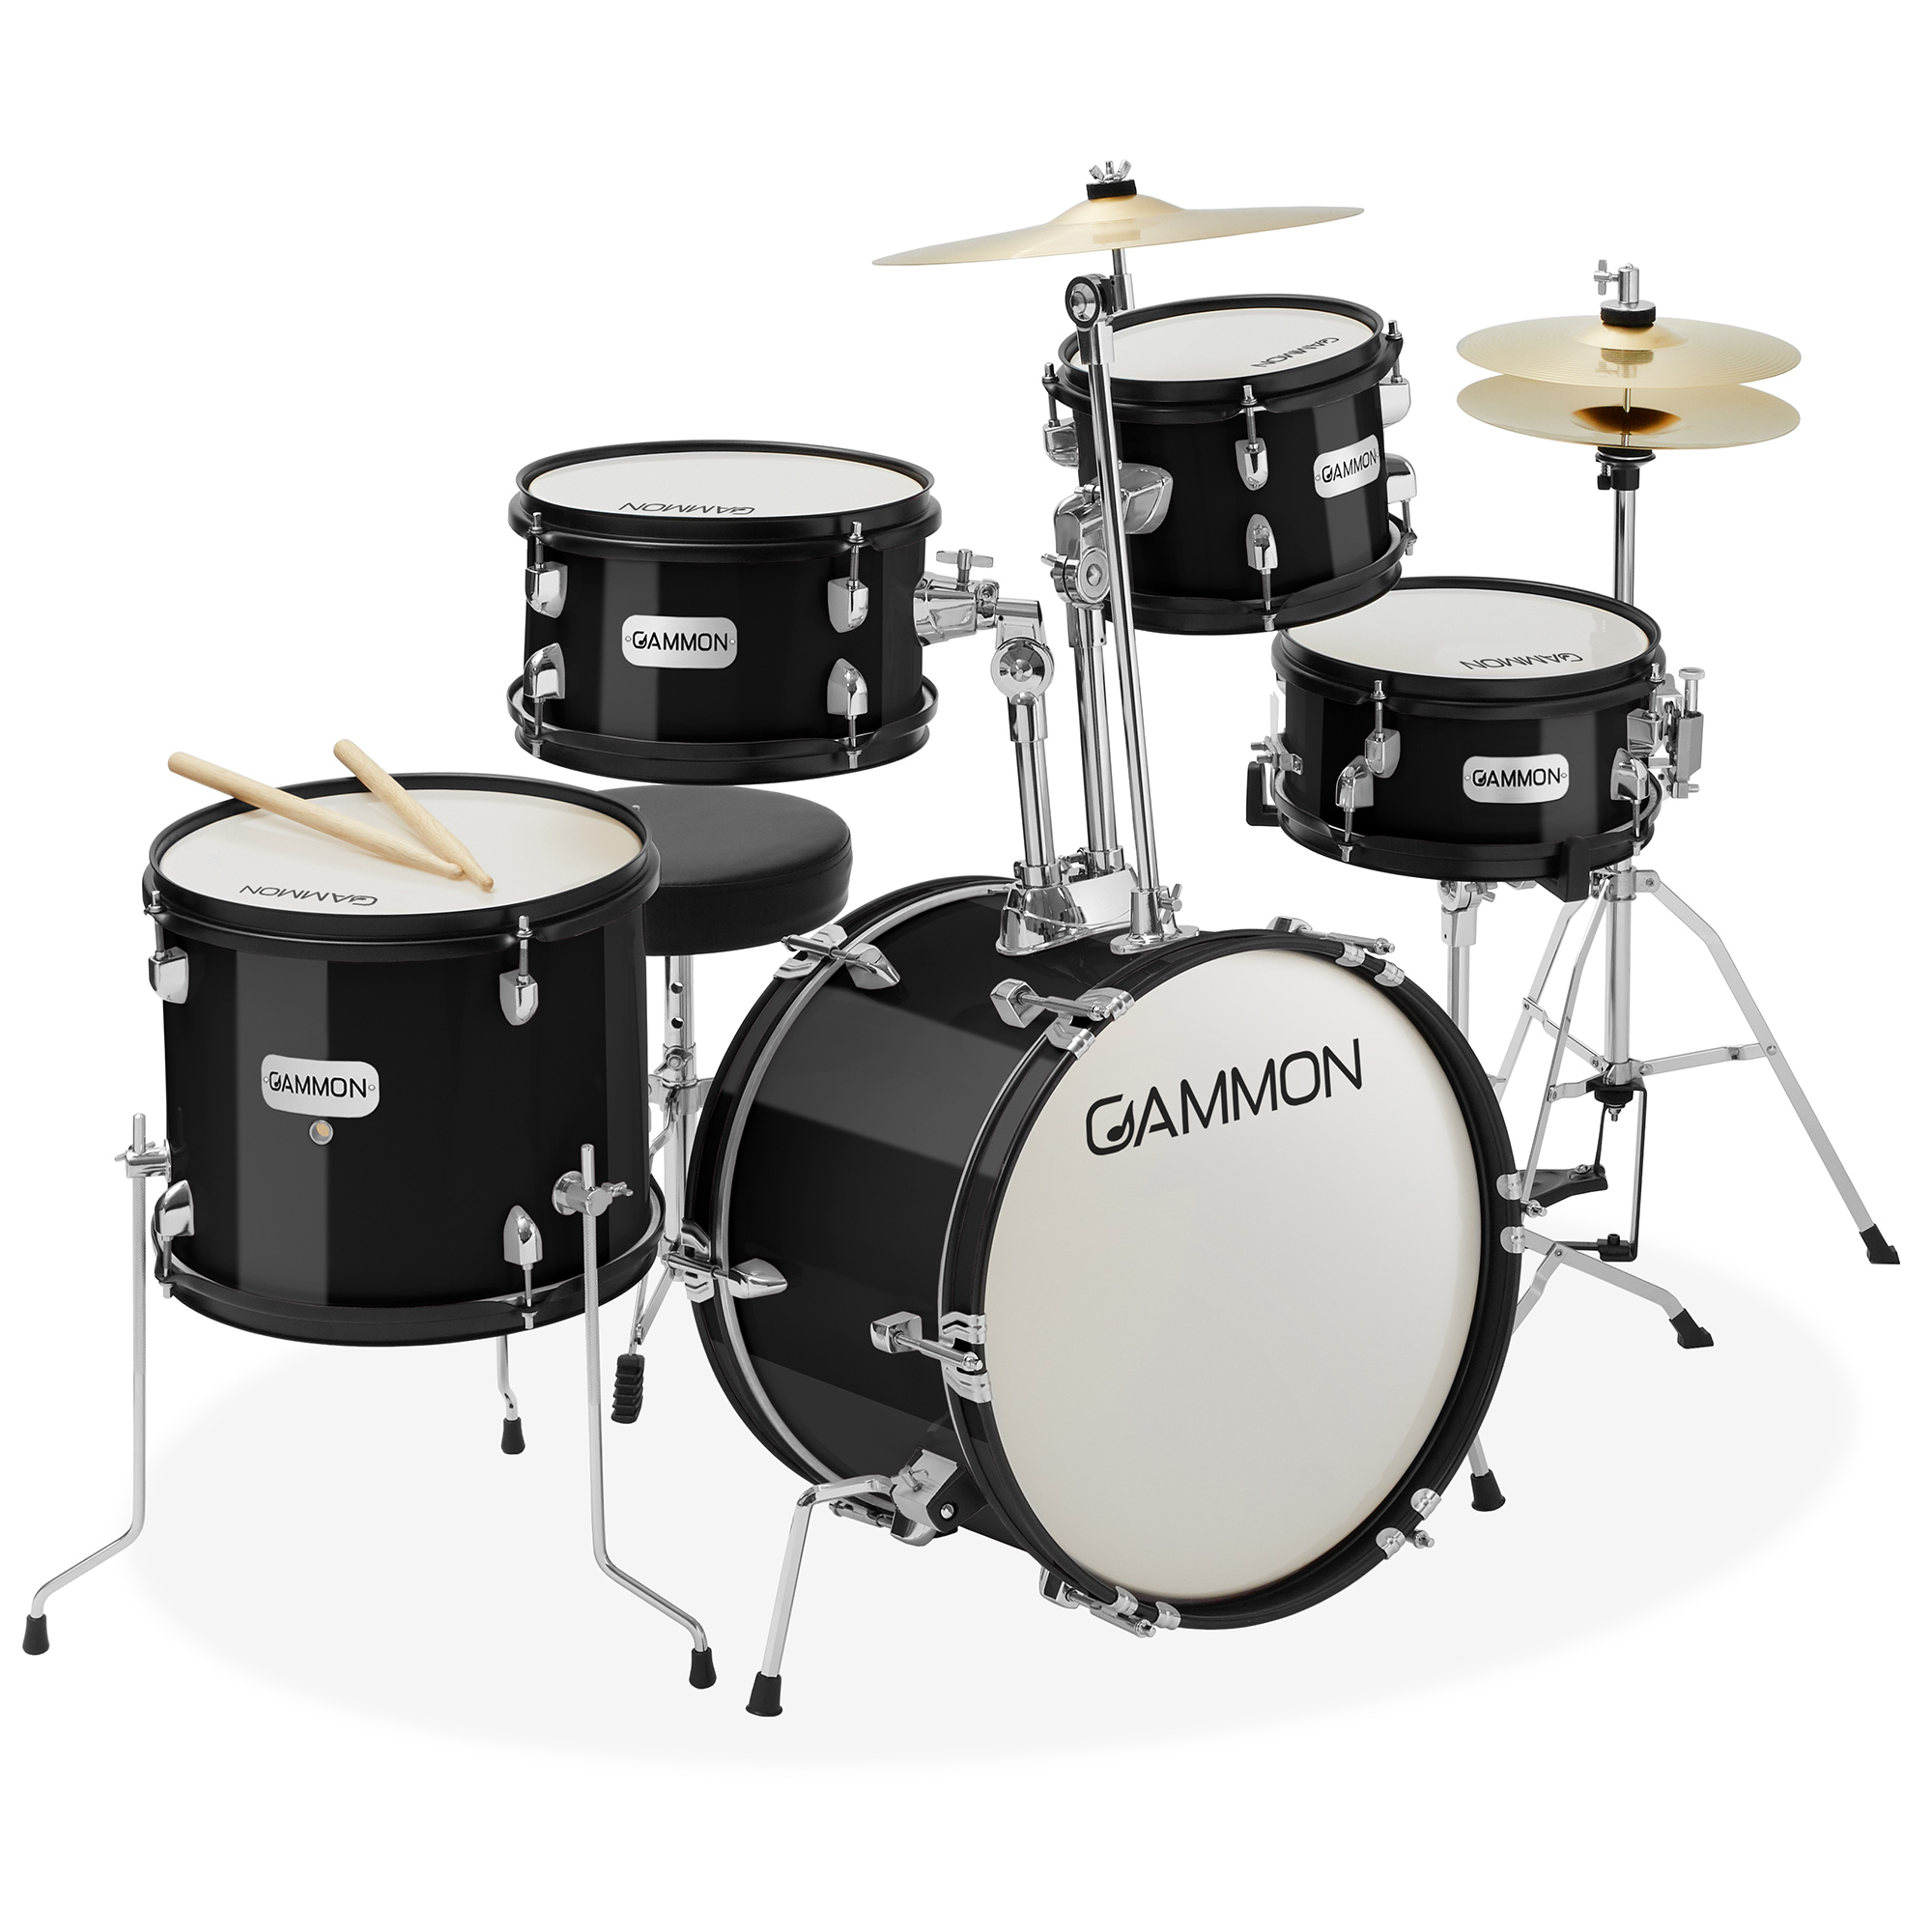 Gammon Percussion 5pc Junior Drum Set - Beginner Kit with Stool & Stands - Black - image 1 of 7